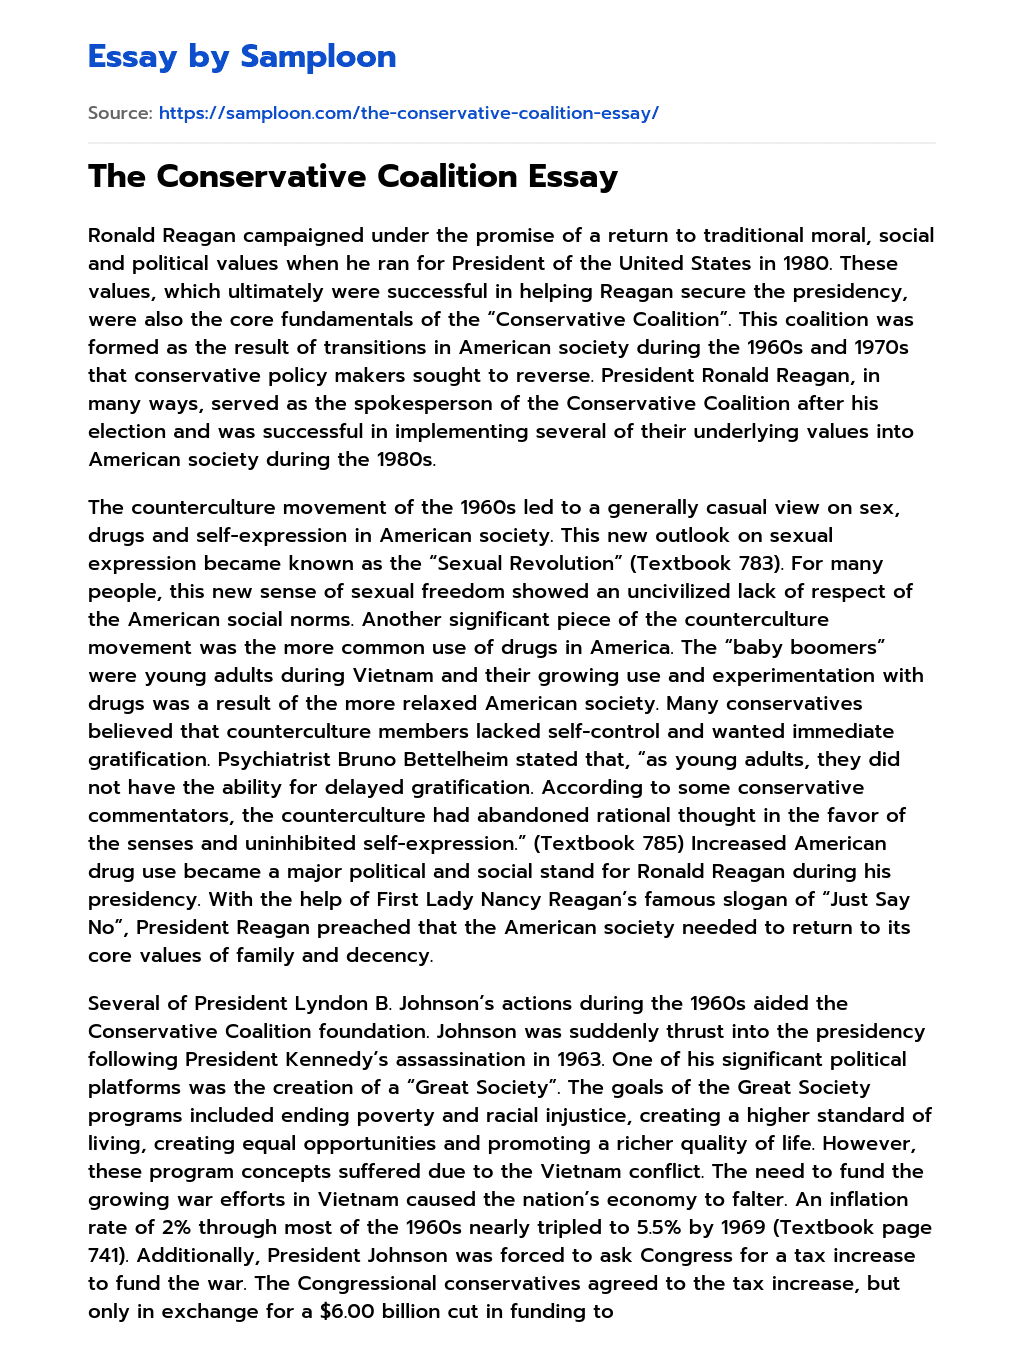 The Conservative Coalition Essay essay